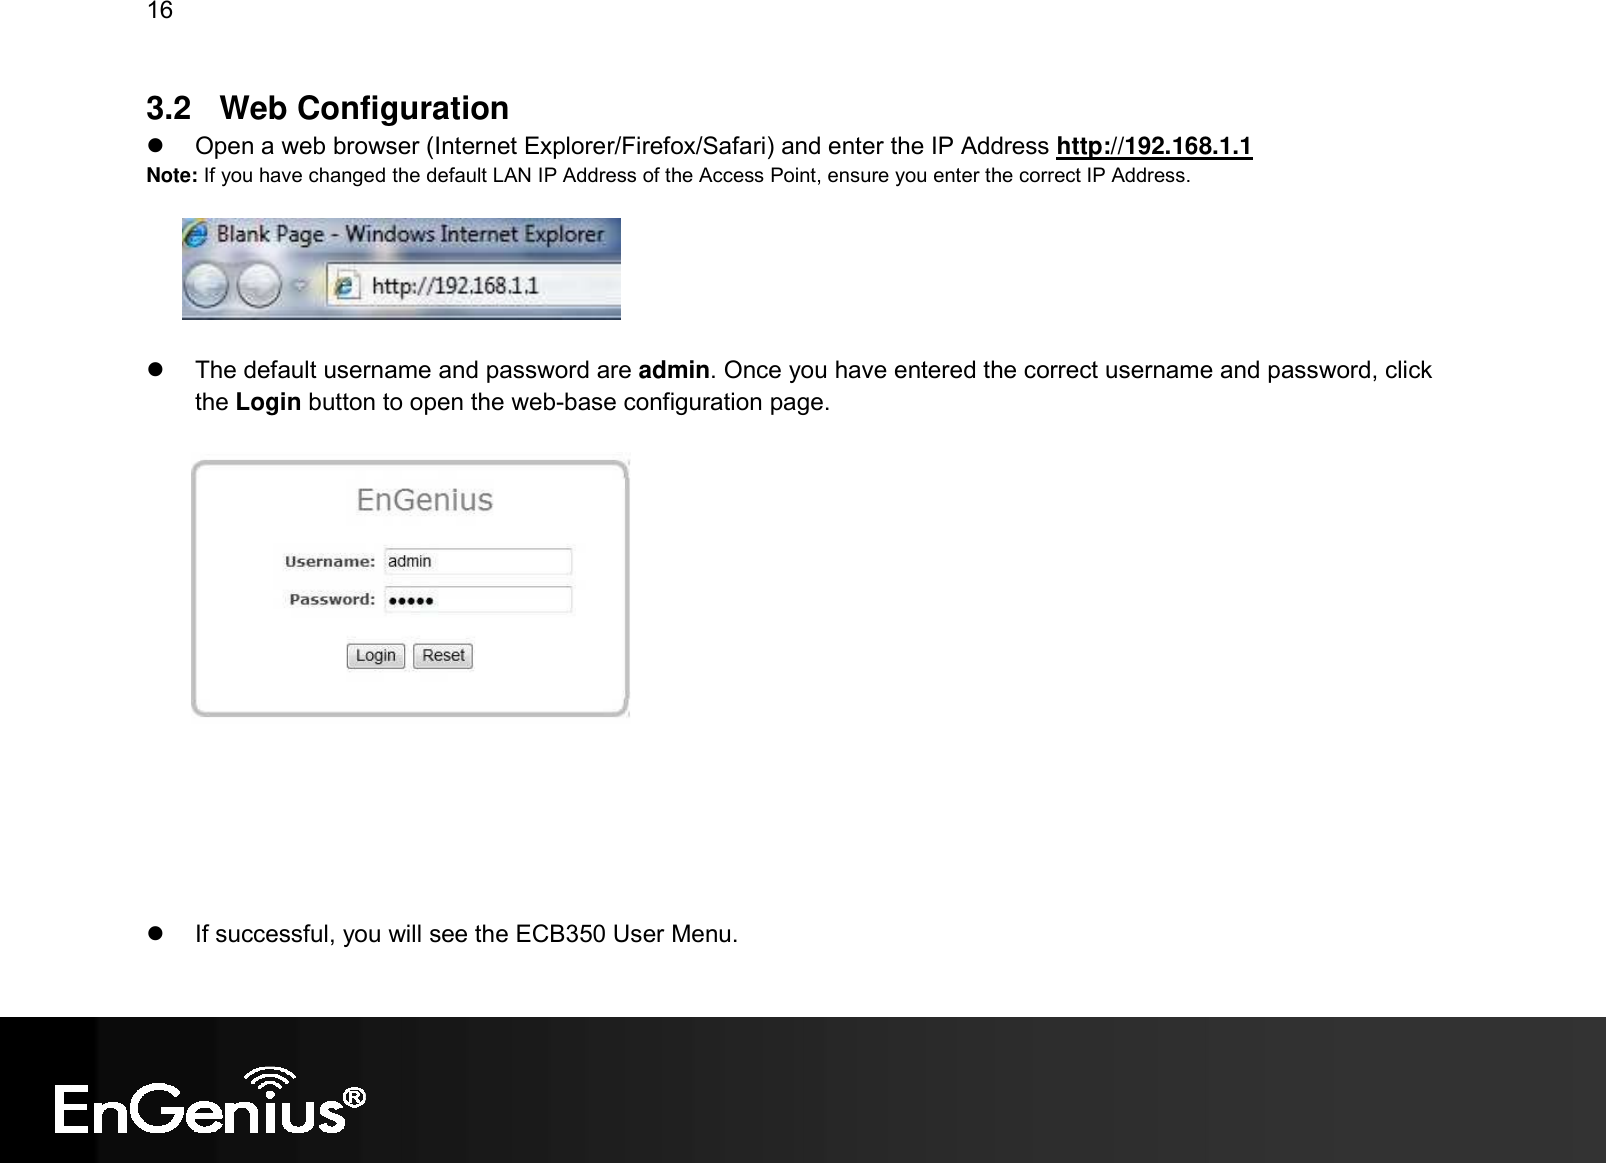 16  3.2  Web Configuration   Open a web browser (Internet Explorer/Firefox/Safari) and enter the IP Address http://192.168.1.1 Note: If you have changed the default LAN IP Address of the Access Point, ensure you enter the correct IP Address.      The default username and password are admin. Once you have entered the correct username and password, click the Login button to open the web-base configuration page.           If successful, you will see the ECB350 User Menu. 